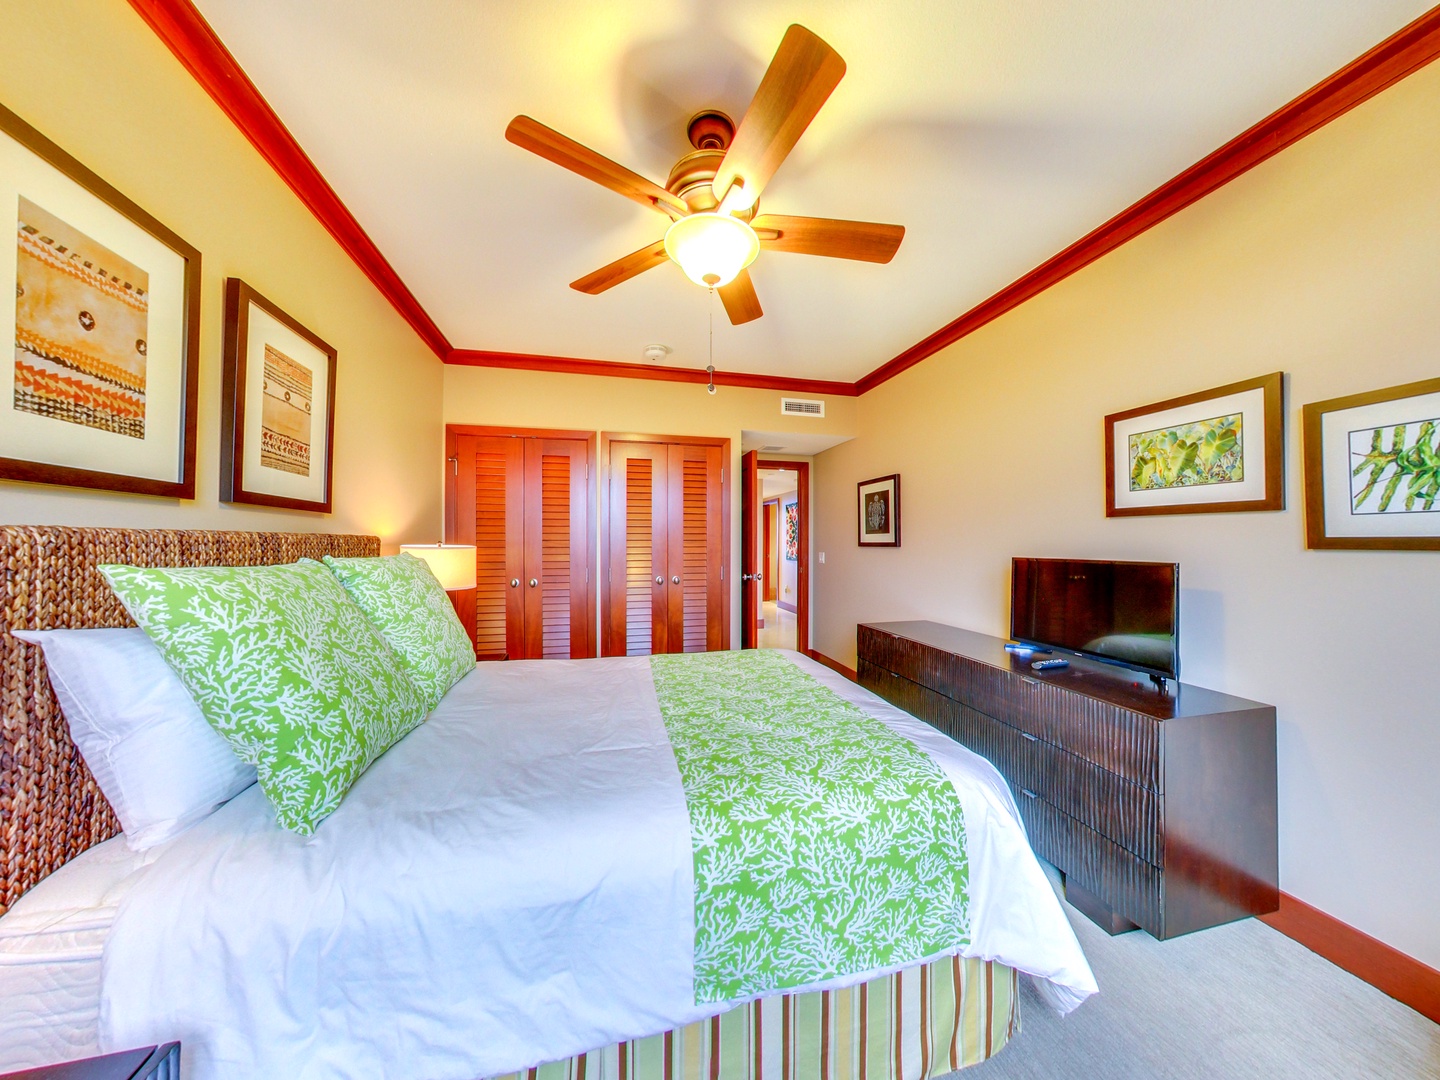 Kapolei Vacation Rentals, Ko Olina Beach Villas O1402 - The second guest bedroom with queen size bed, flat screen TV and ceiling fan in our Ko Olina Villa.